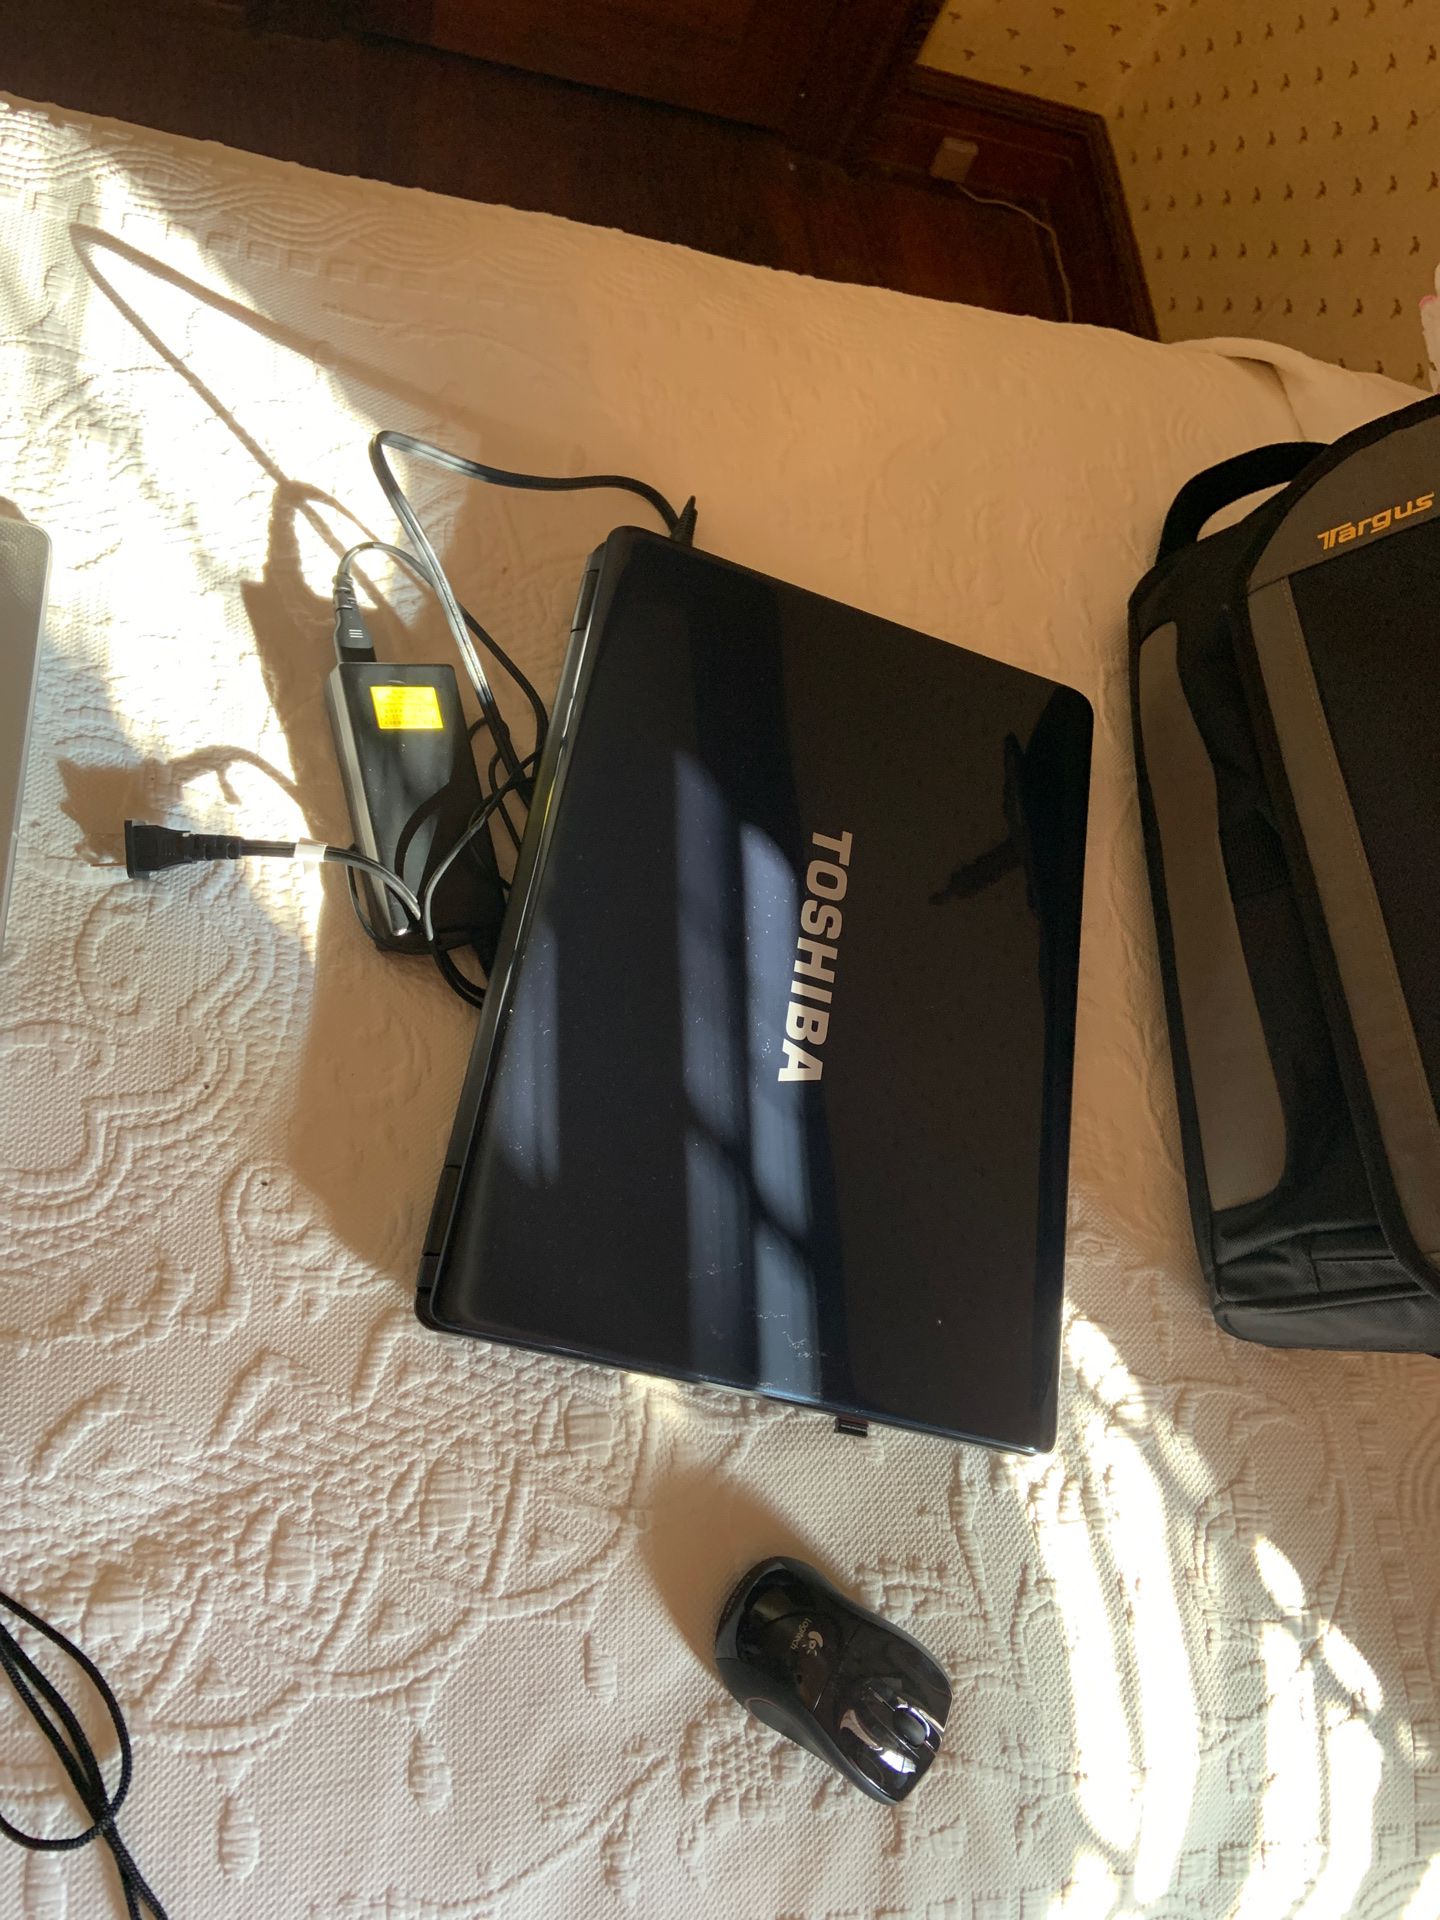 Toshiba laptop with charger and wireless mouse